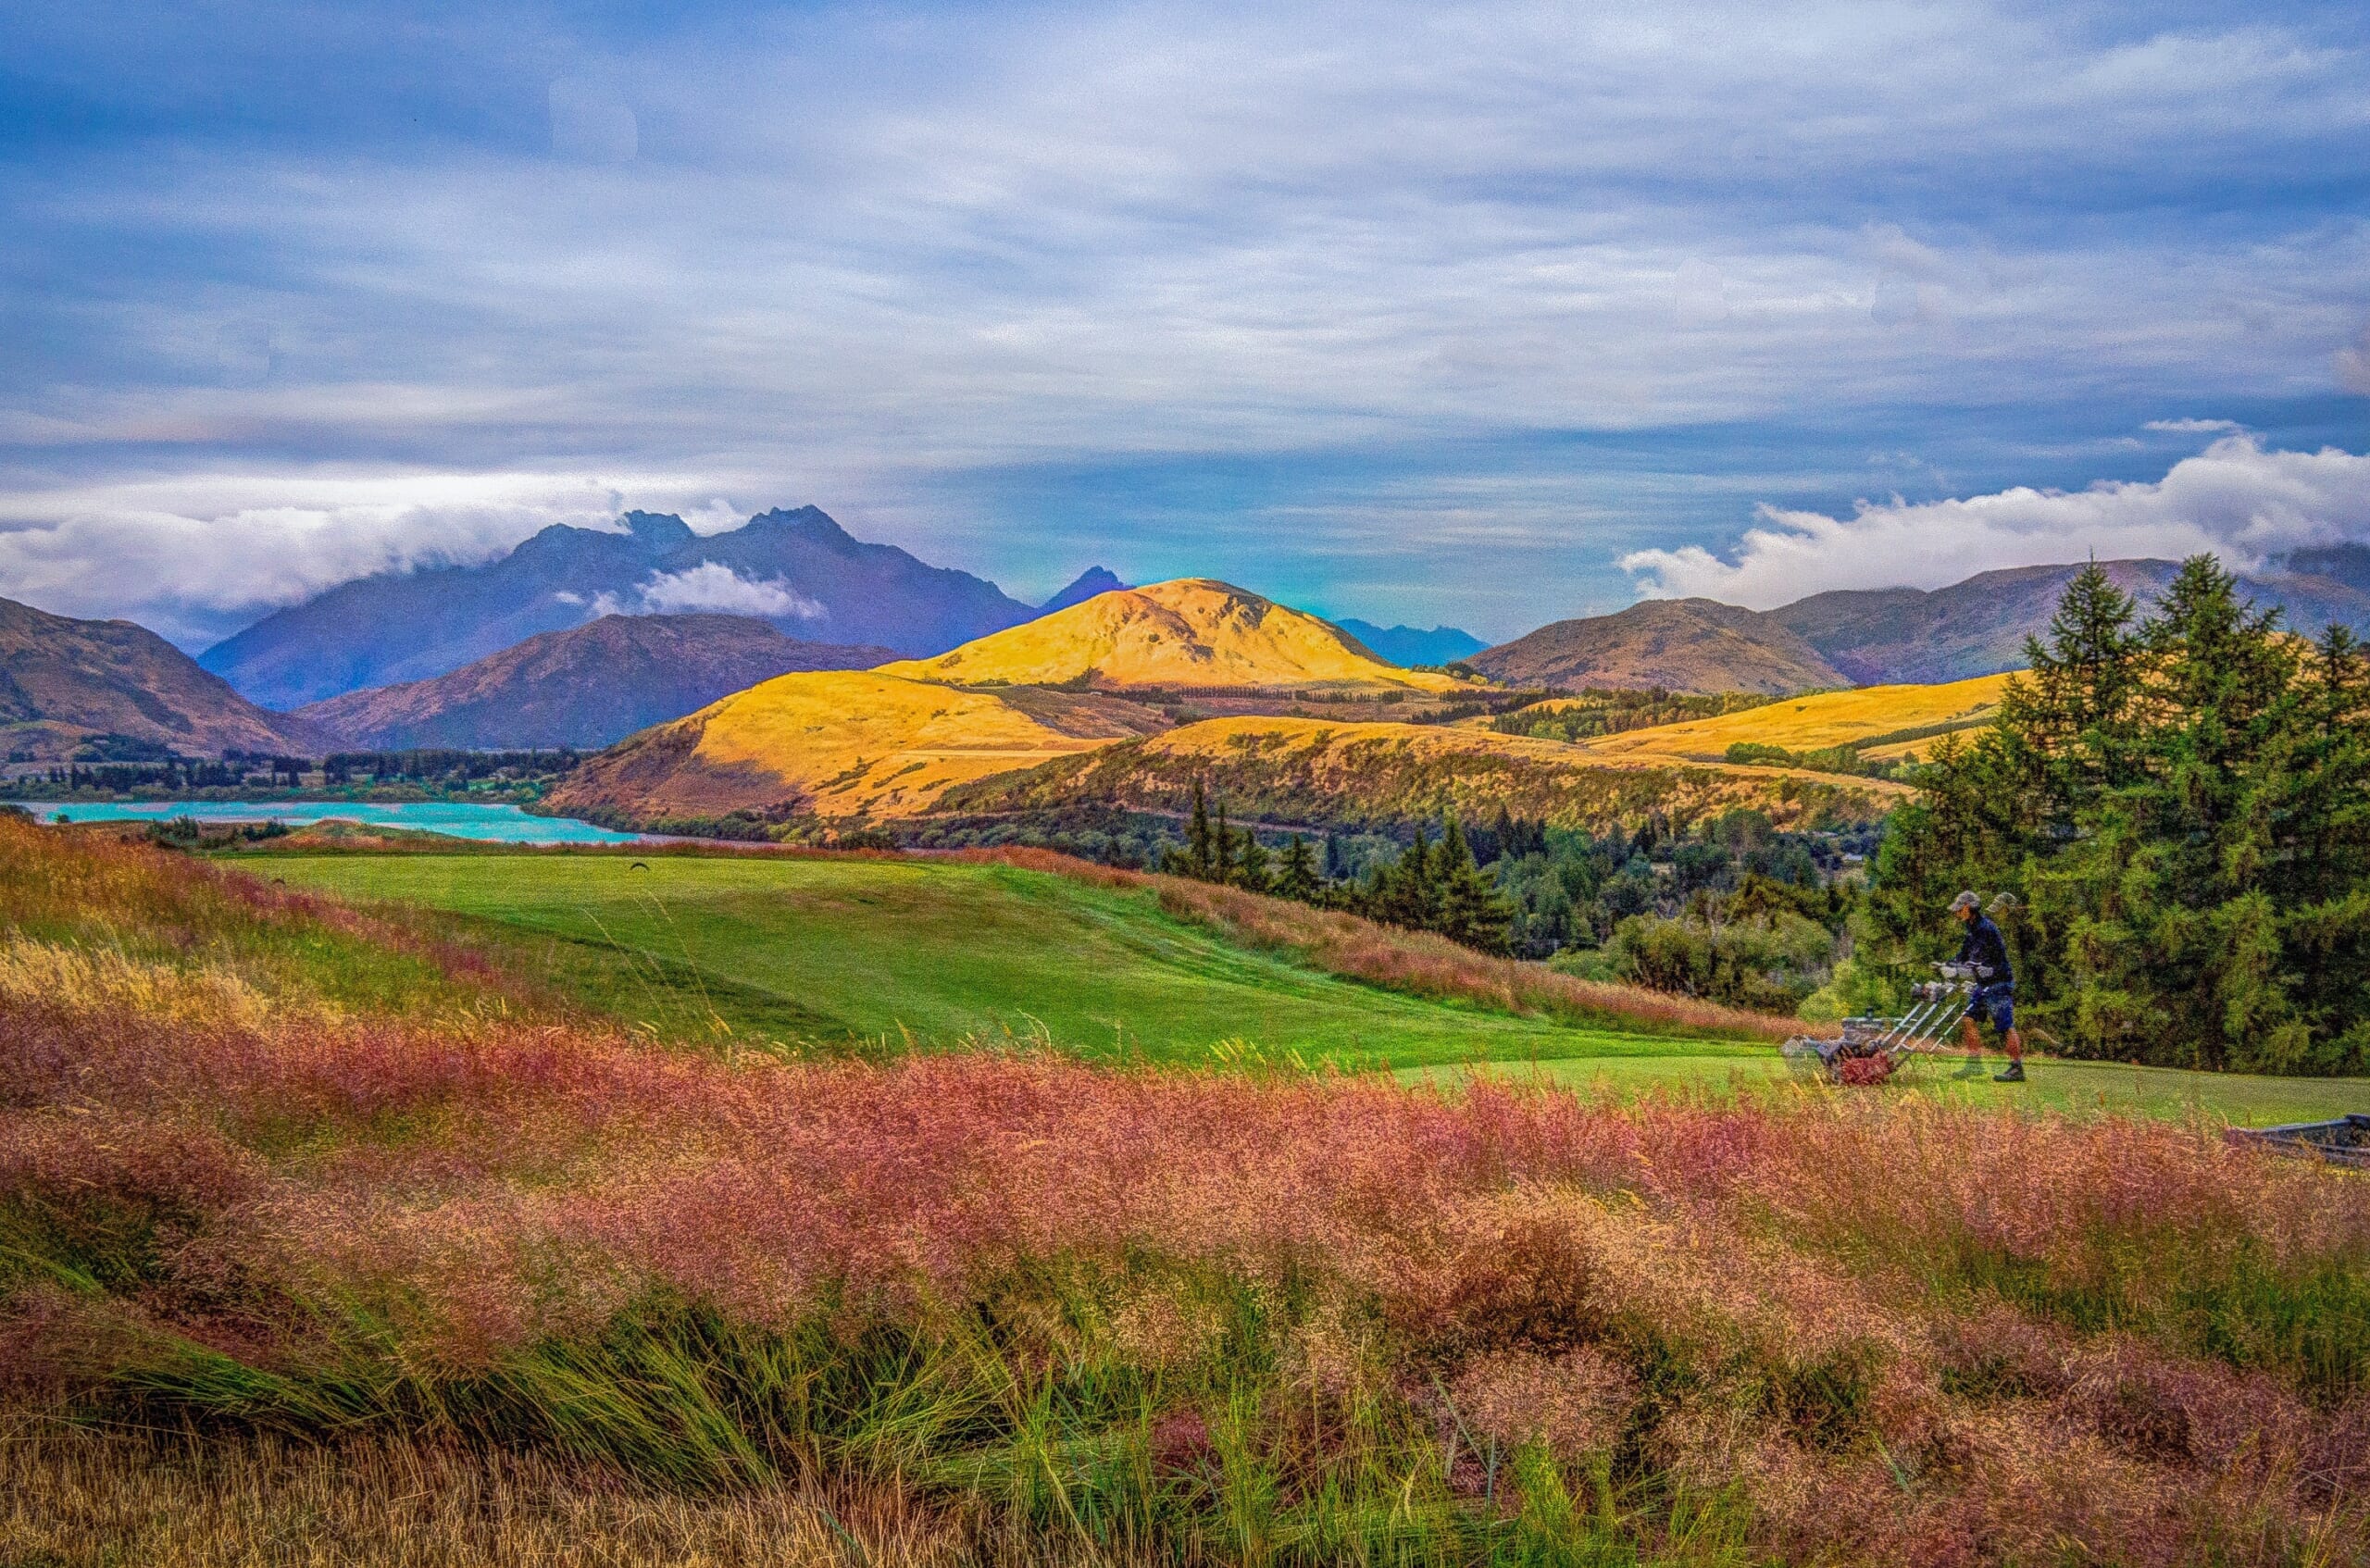 New zealand, Glenorchy Image by Michelle Raponi from Pixabay